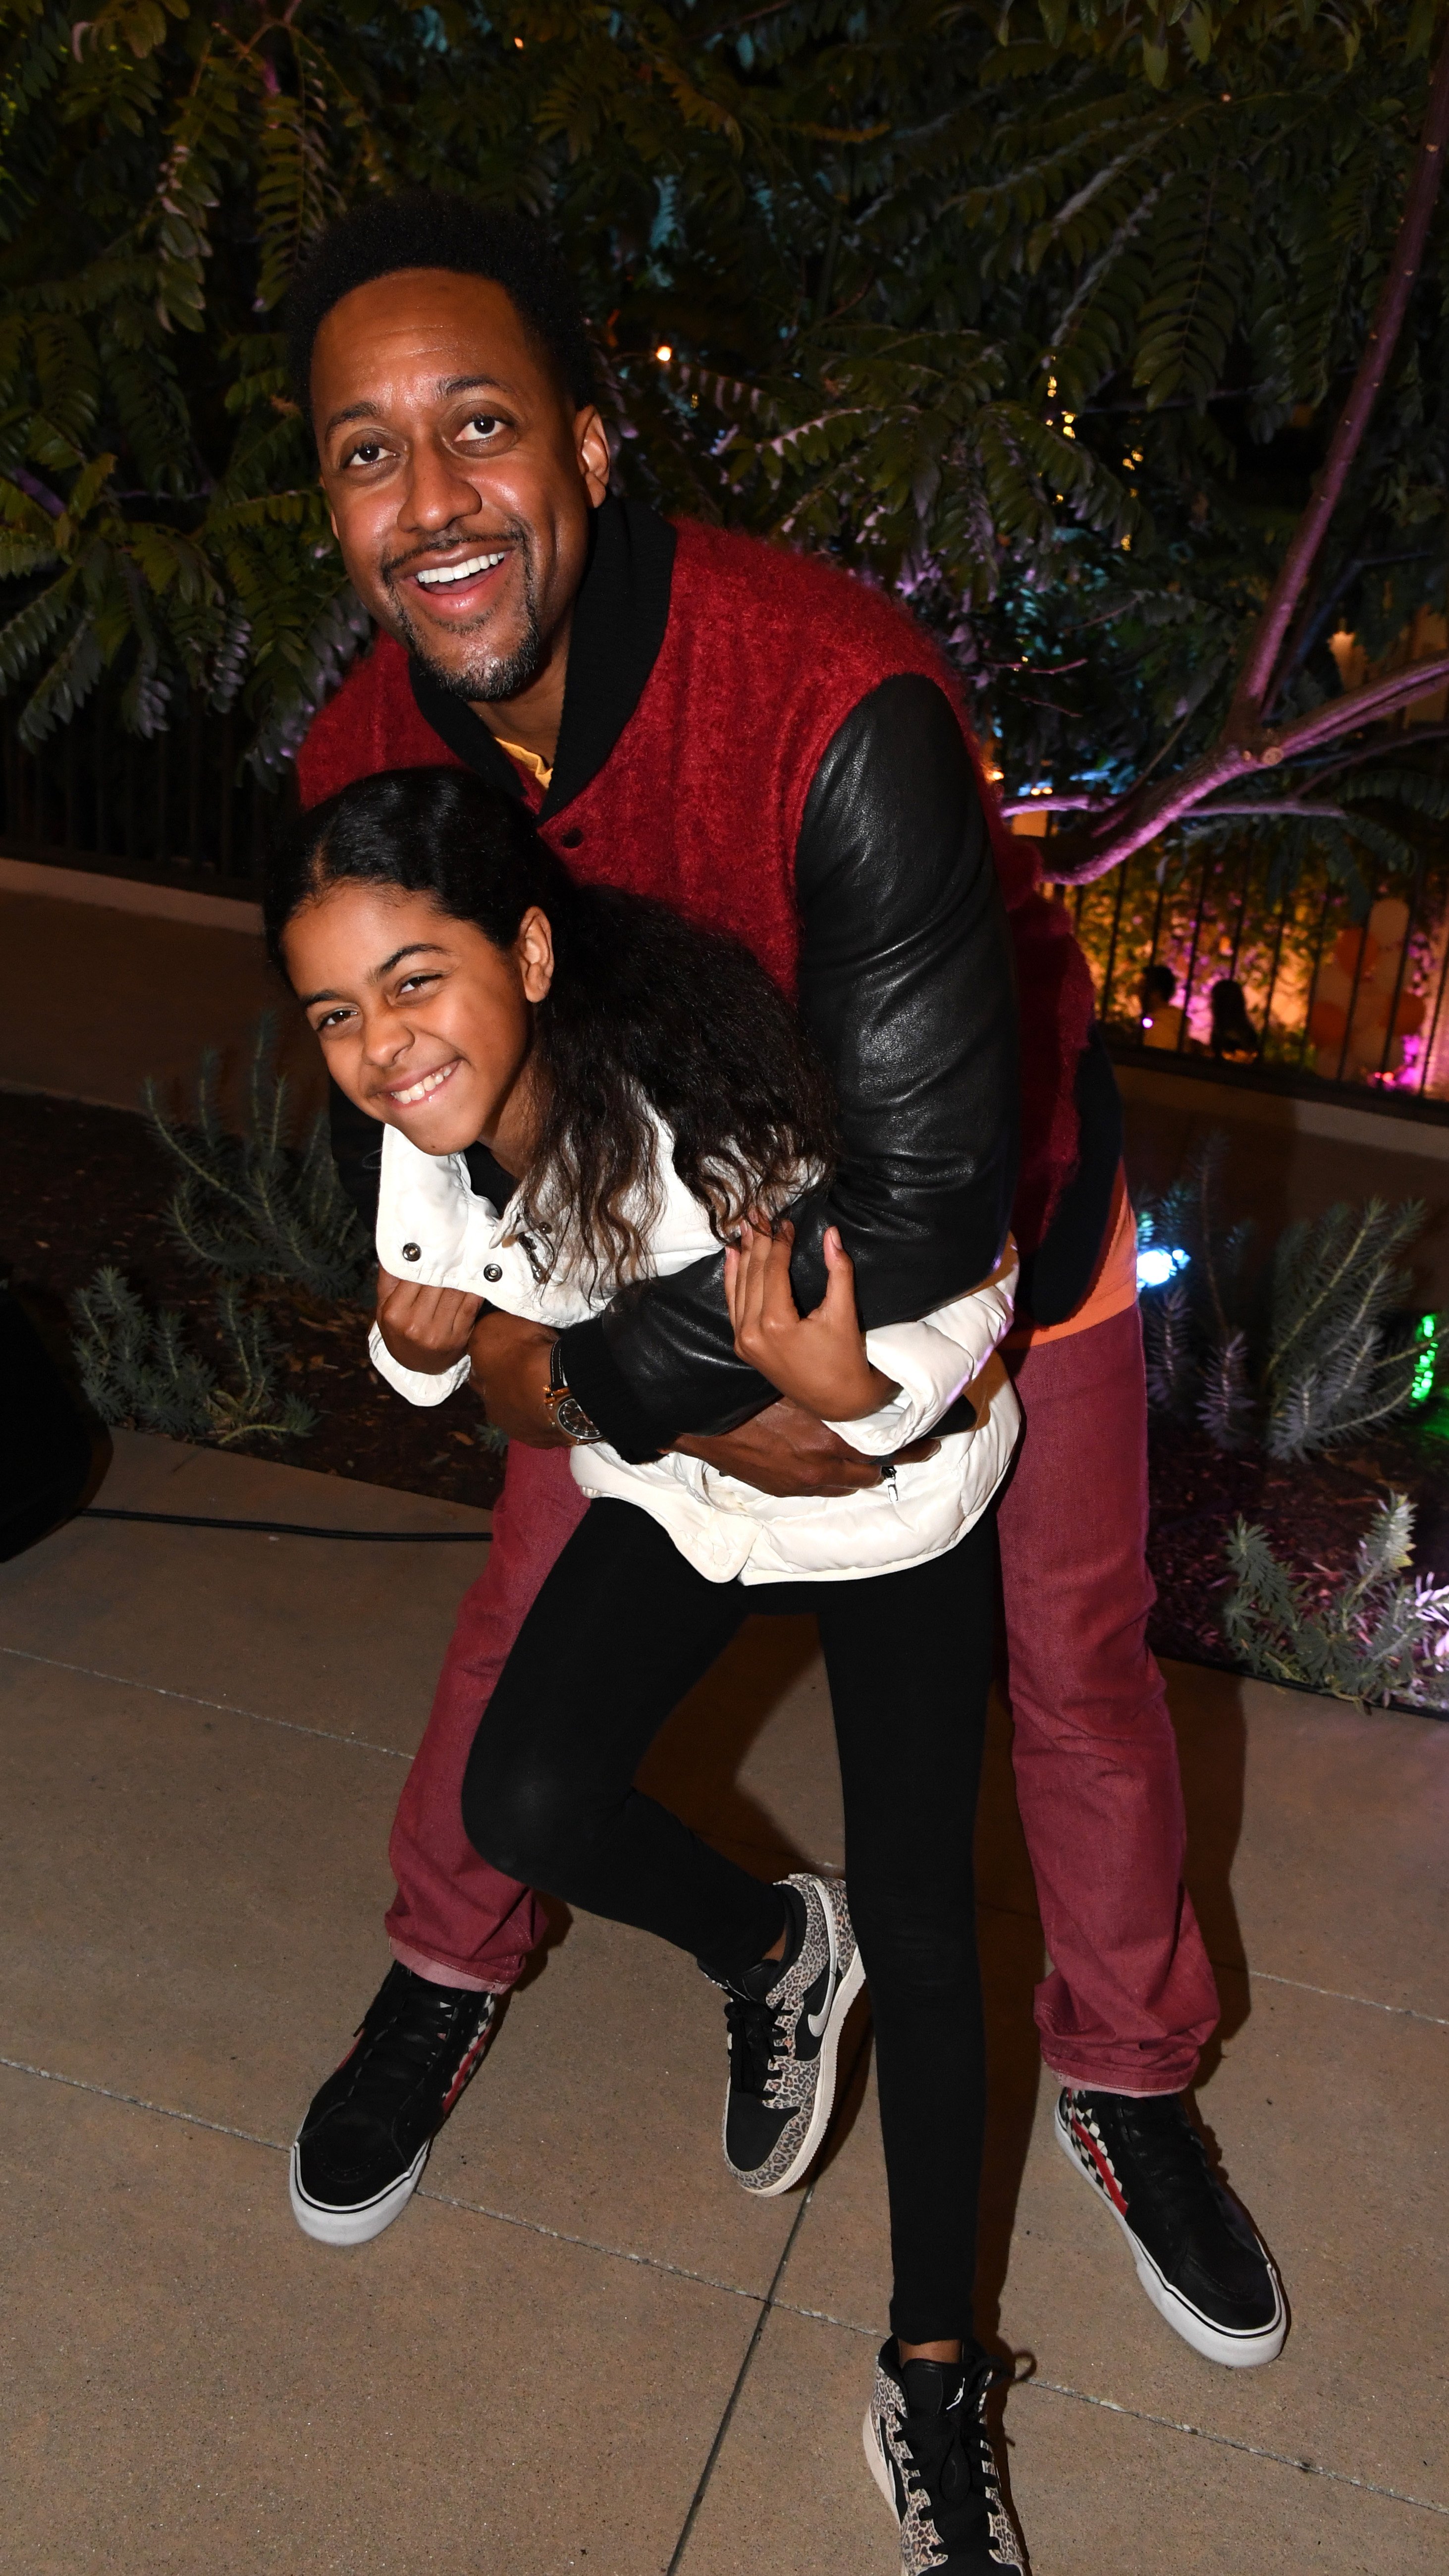 Jaleel White and Samaya White at Tender Fest on November 15, 2019, in Los Angeles, California. | Source: Getty Images